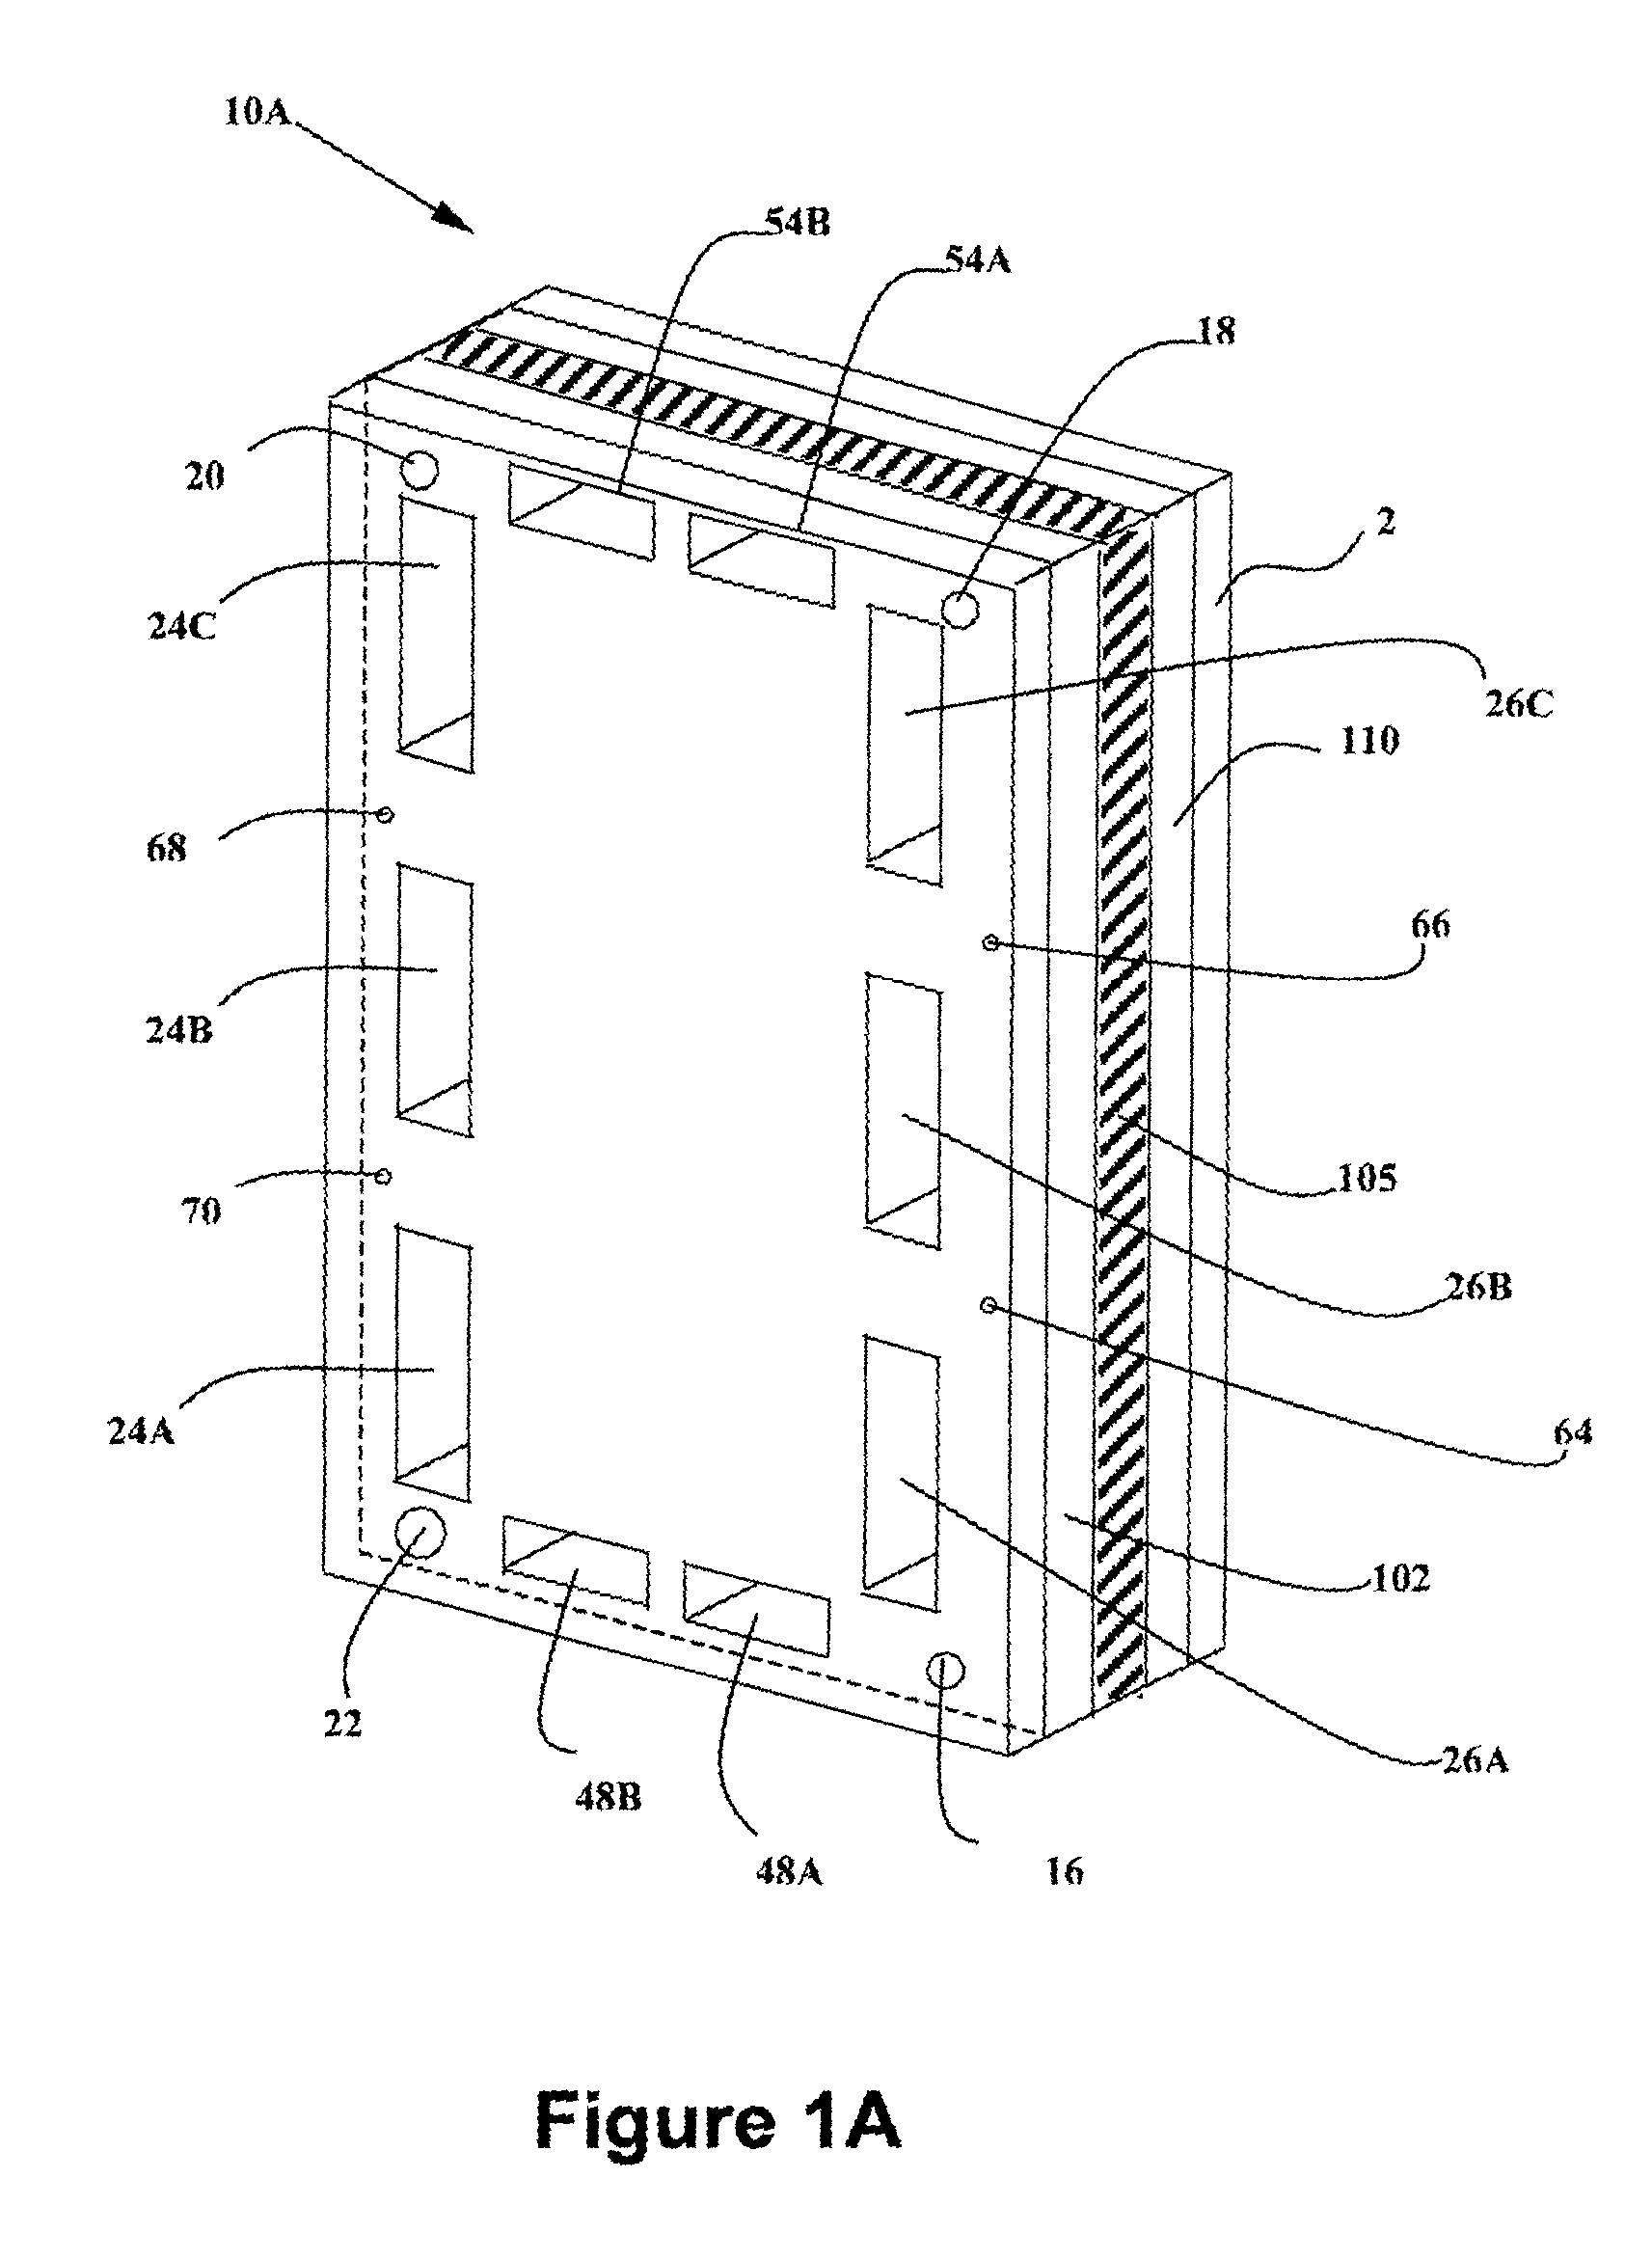 Integral gasketed filtration cassette article and method of making the same